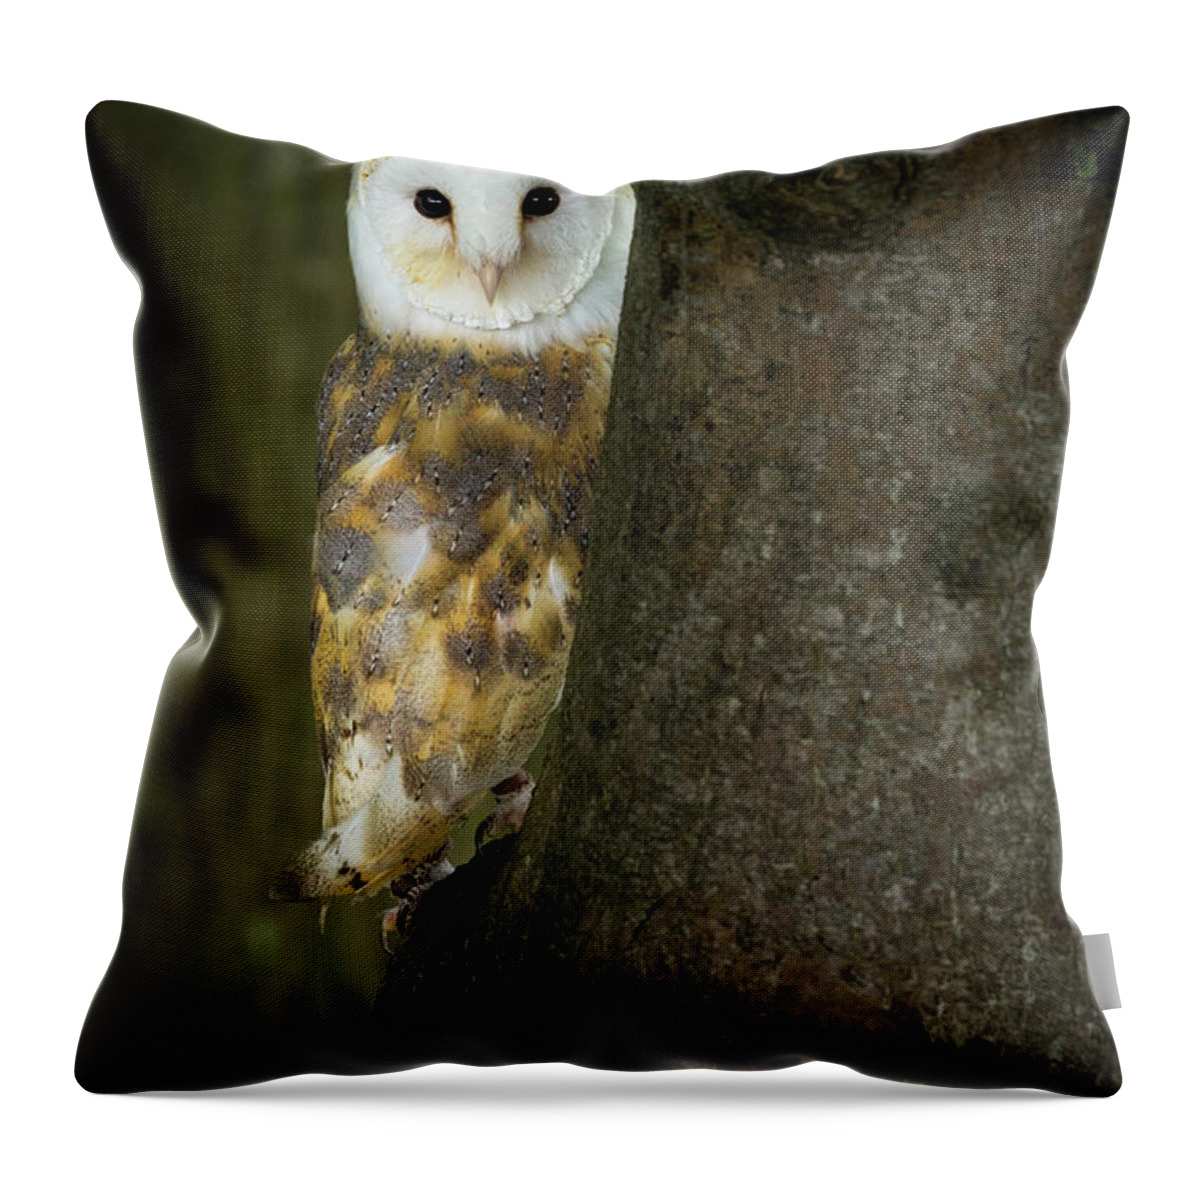 Barn Owl Throw Pillow featuring the photograph Barn Owl 1 by Nigel R Bell